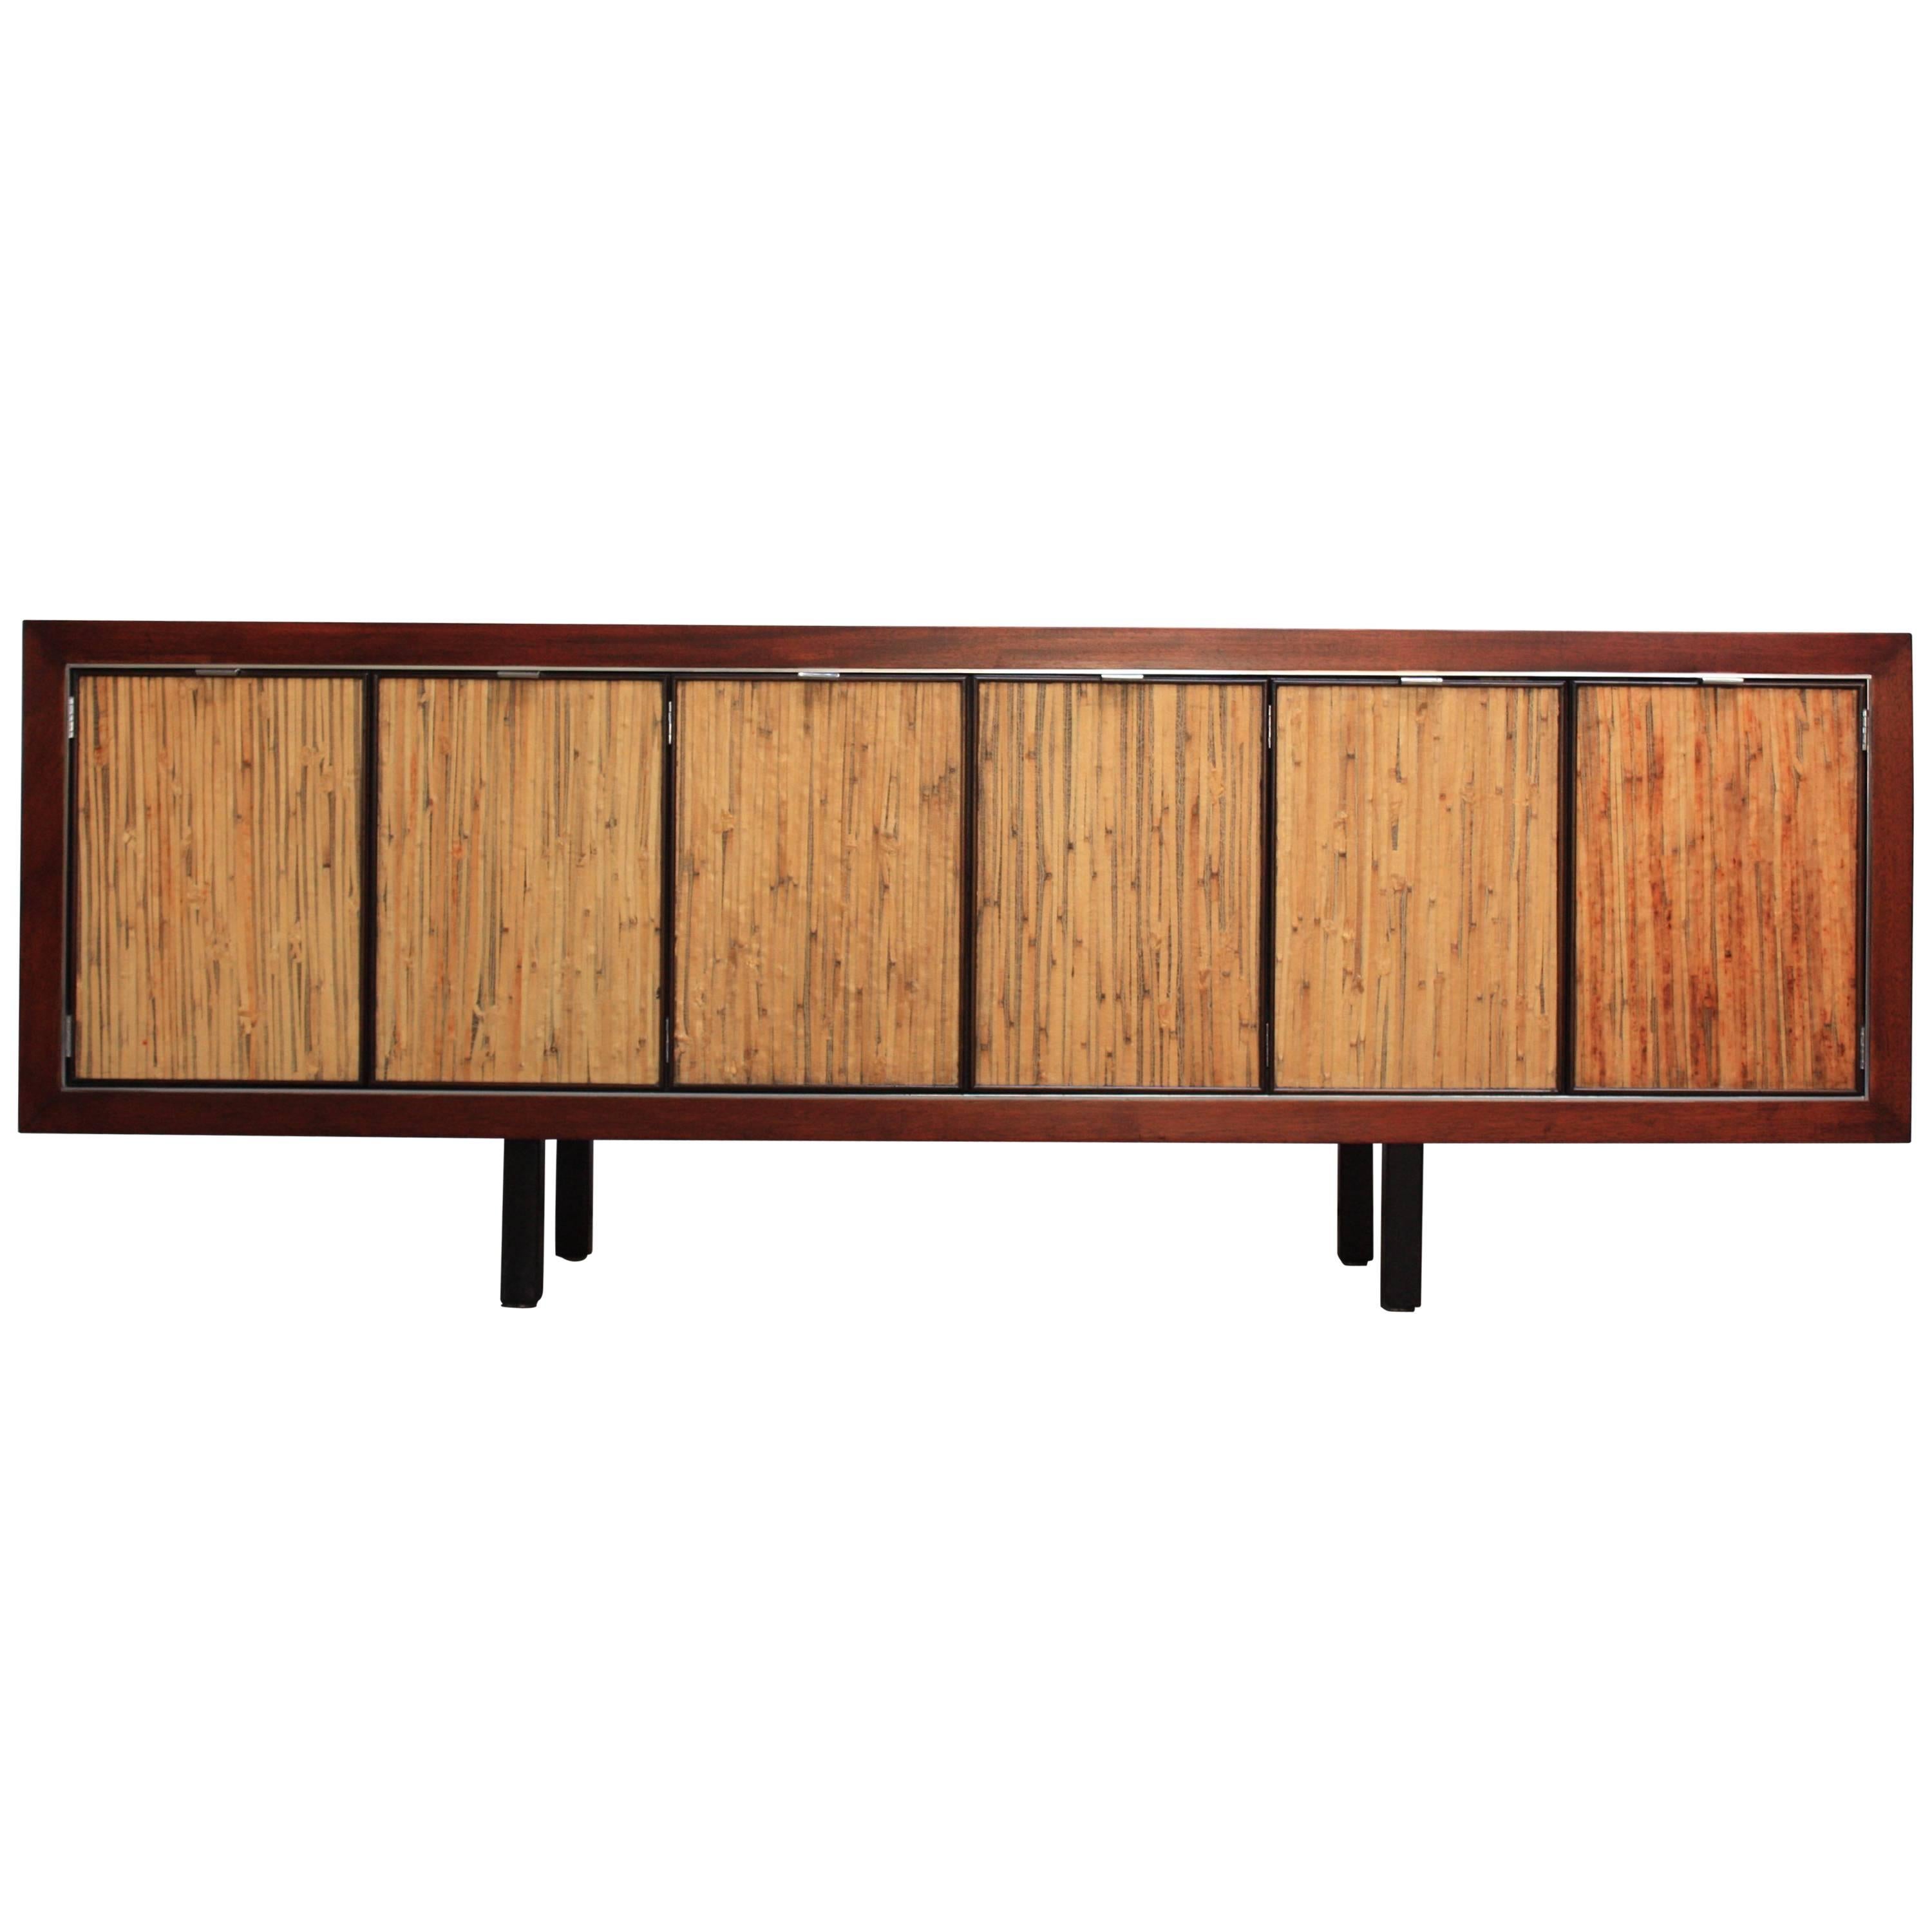 1970s Walnut, Bamboo and Cherry Credenza after Harvey Probber